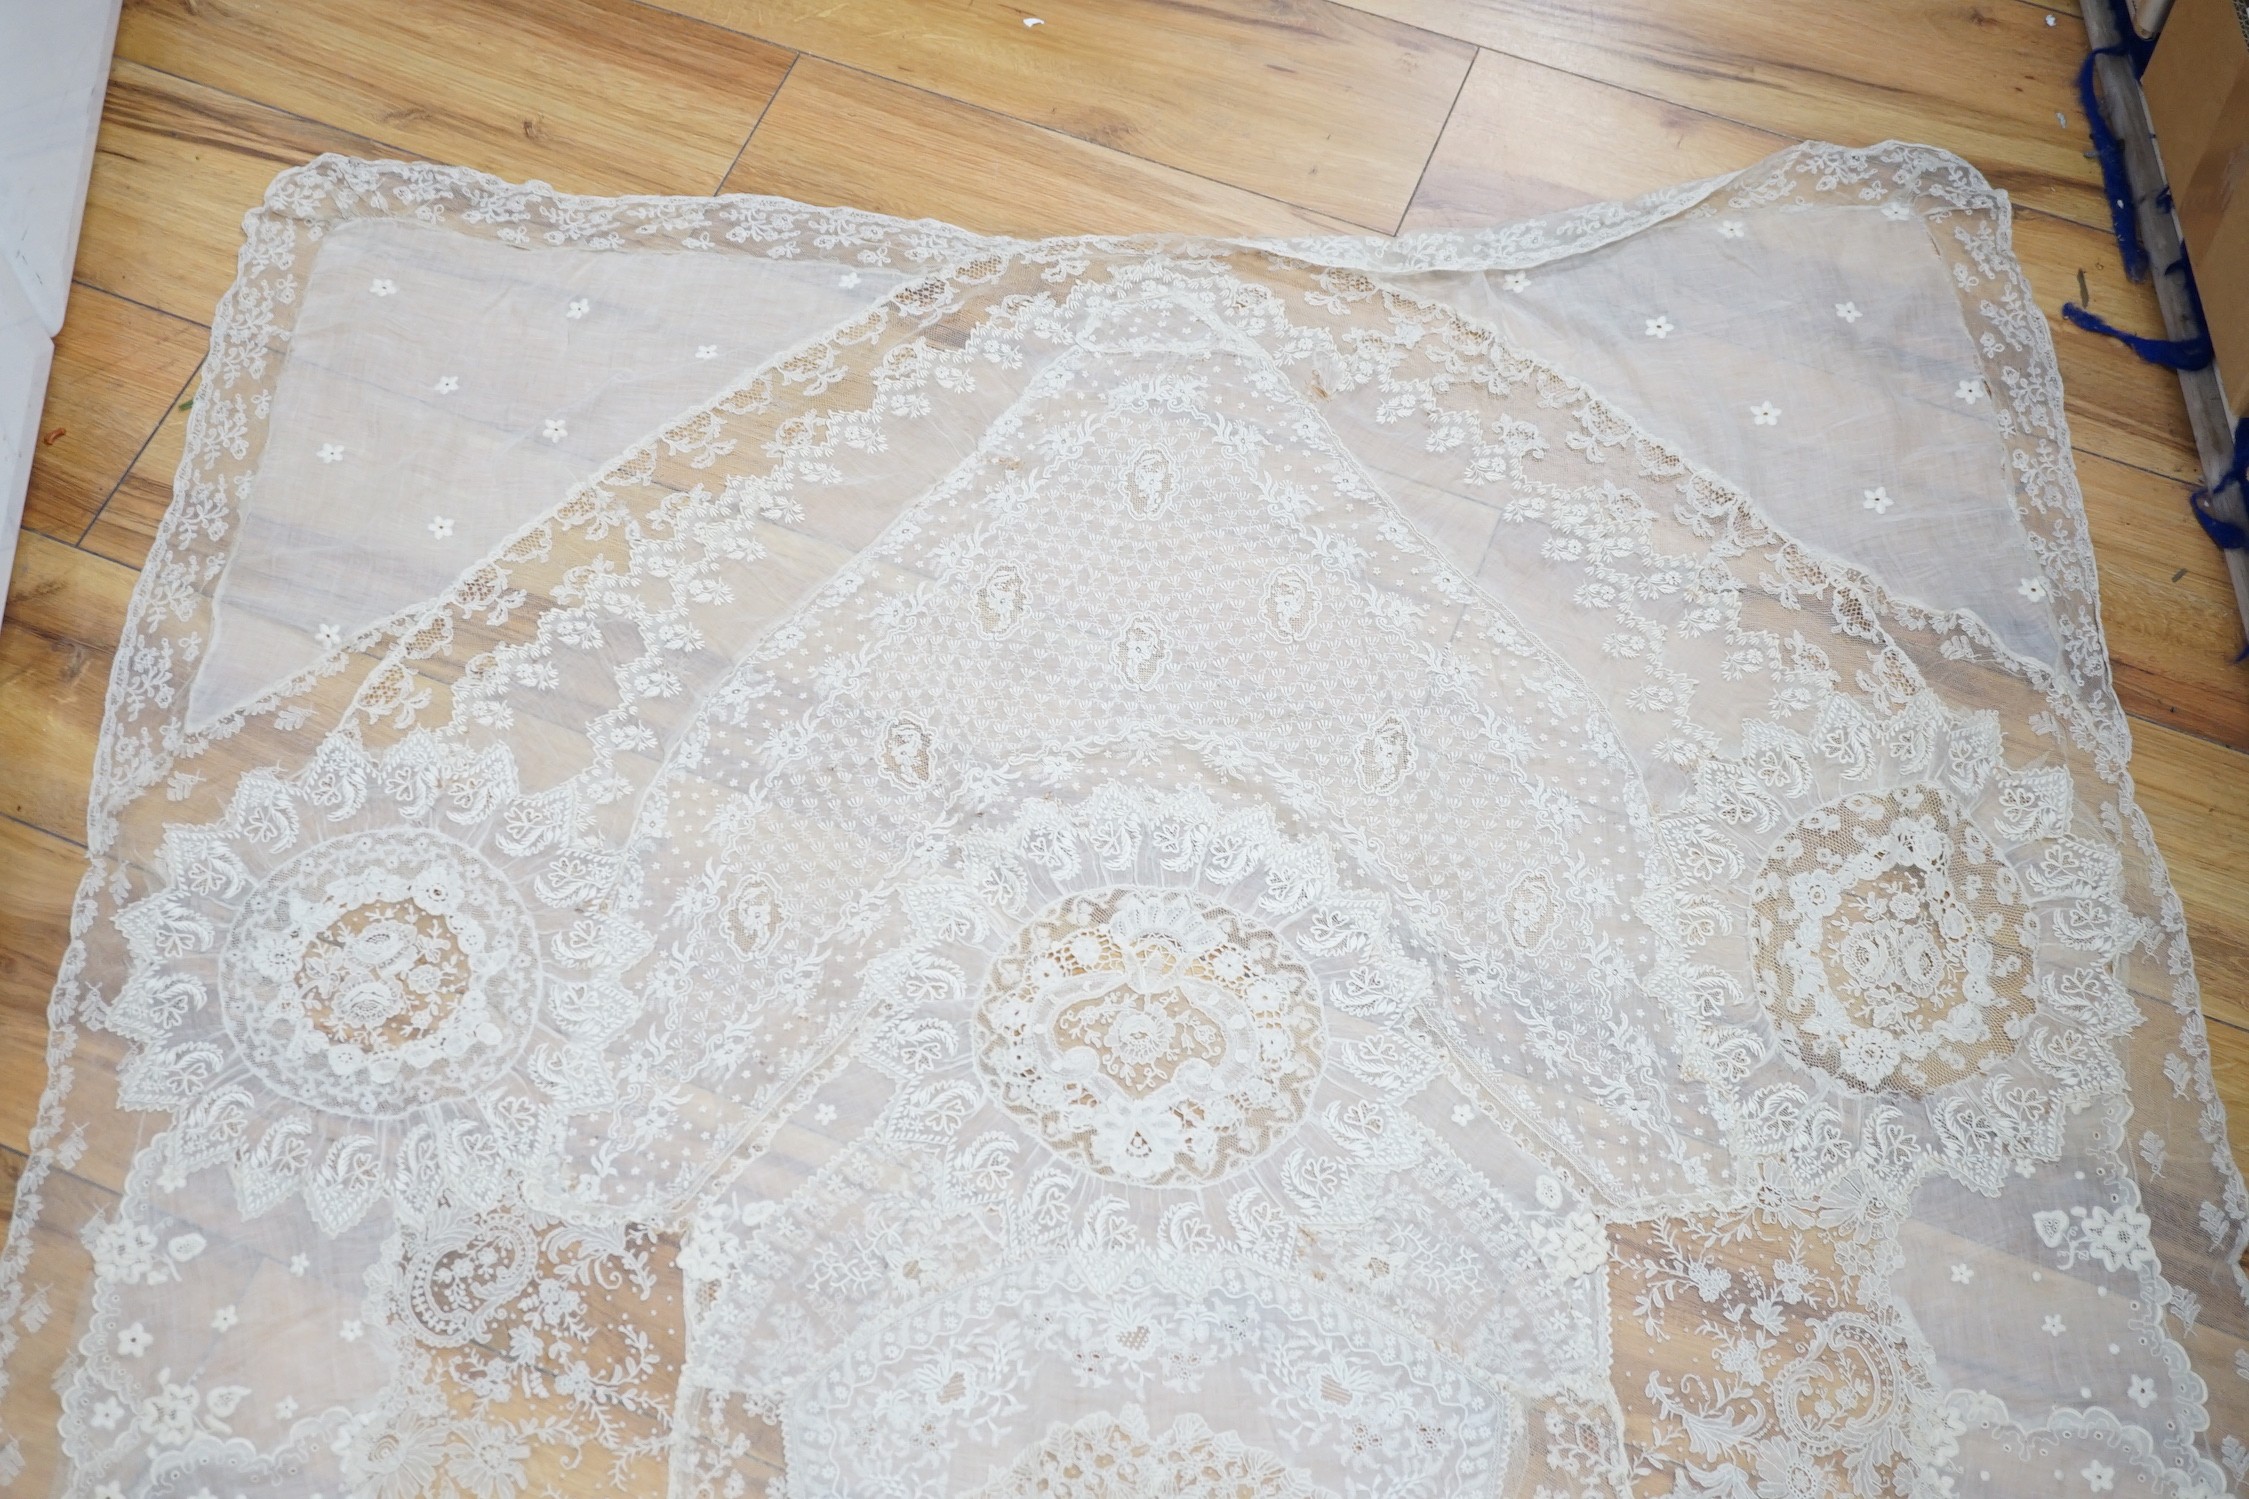 A late 19th century Normandy lace table cover of hand spun linen, hand white worked, with Brussels Point de Gaze insertions and bobbin lace edging, together with two feathers and a net veil